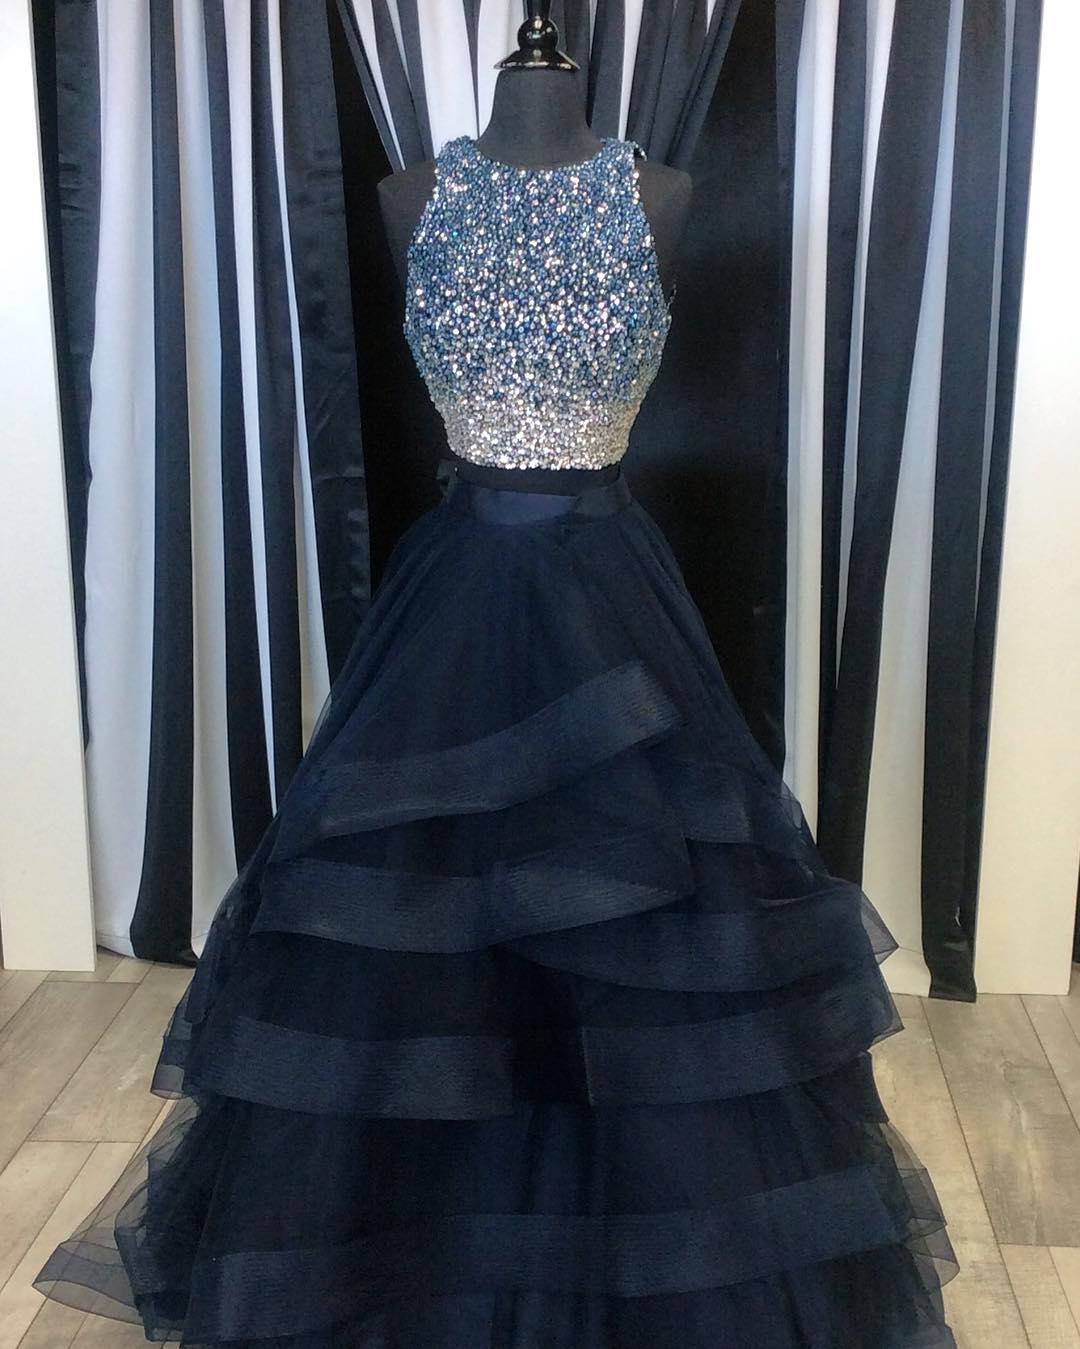 Two Piece Prom Dresses,Ruffles Ball Gowns,Sparkly Sequins Dress,2 Piece Prom Dress,Long Party Dress,Prom Dresses 2017,Black Prom Dress